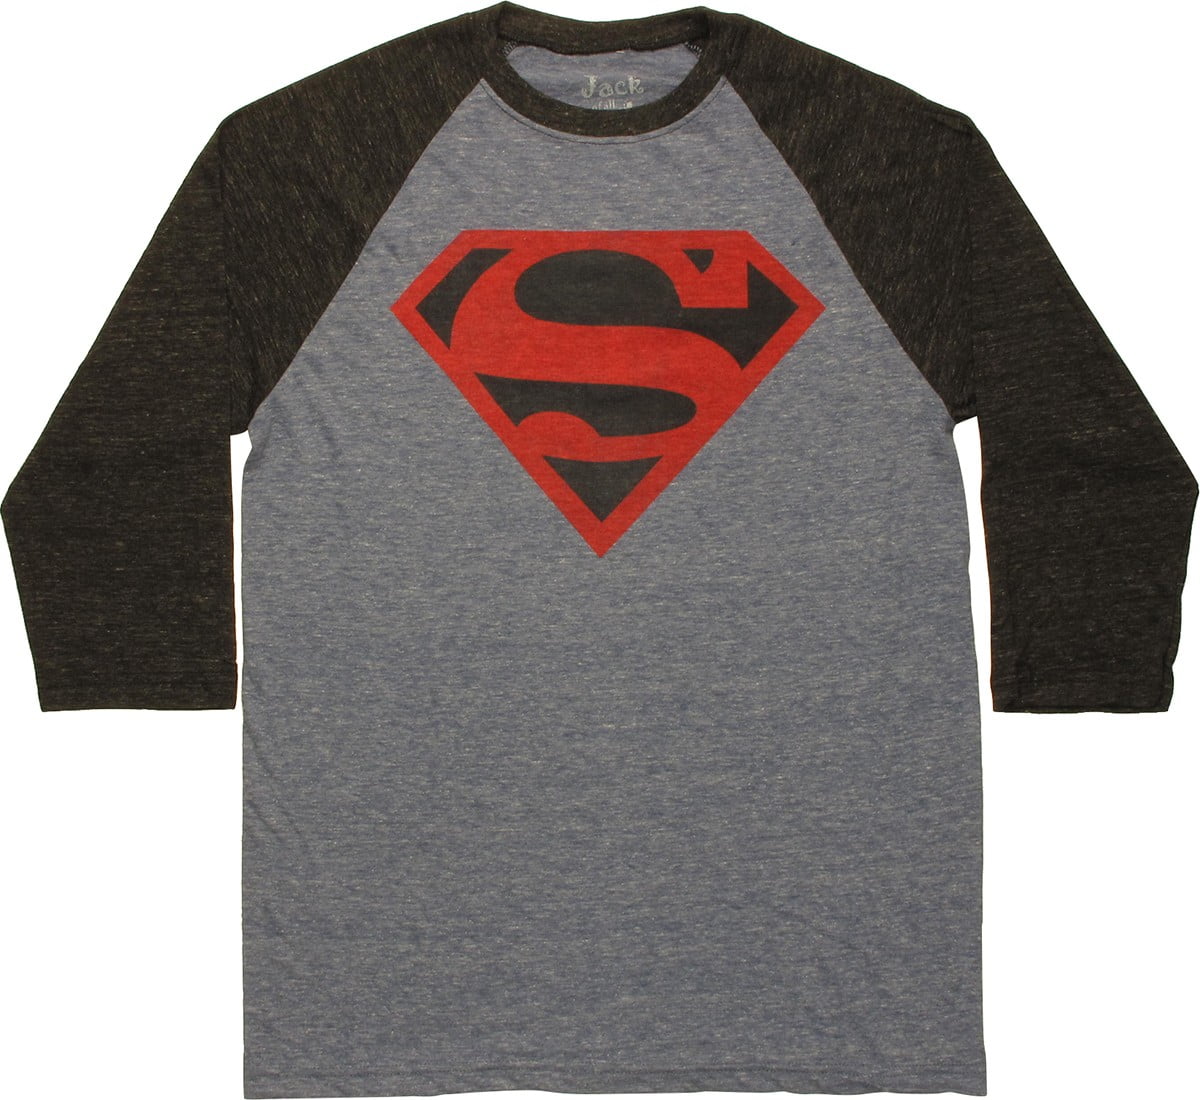 black superman t shirt with red logo